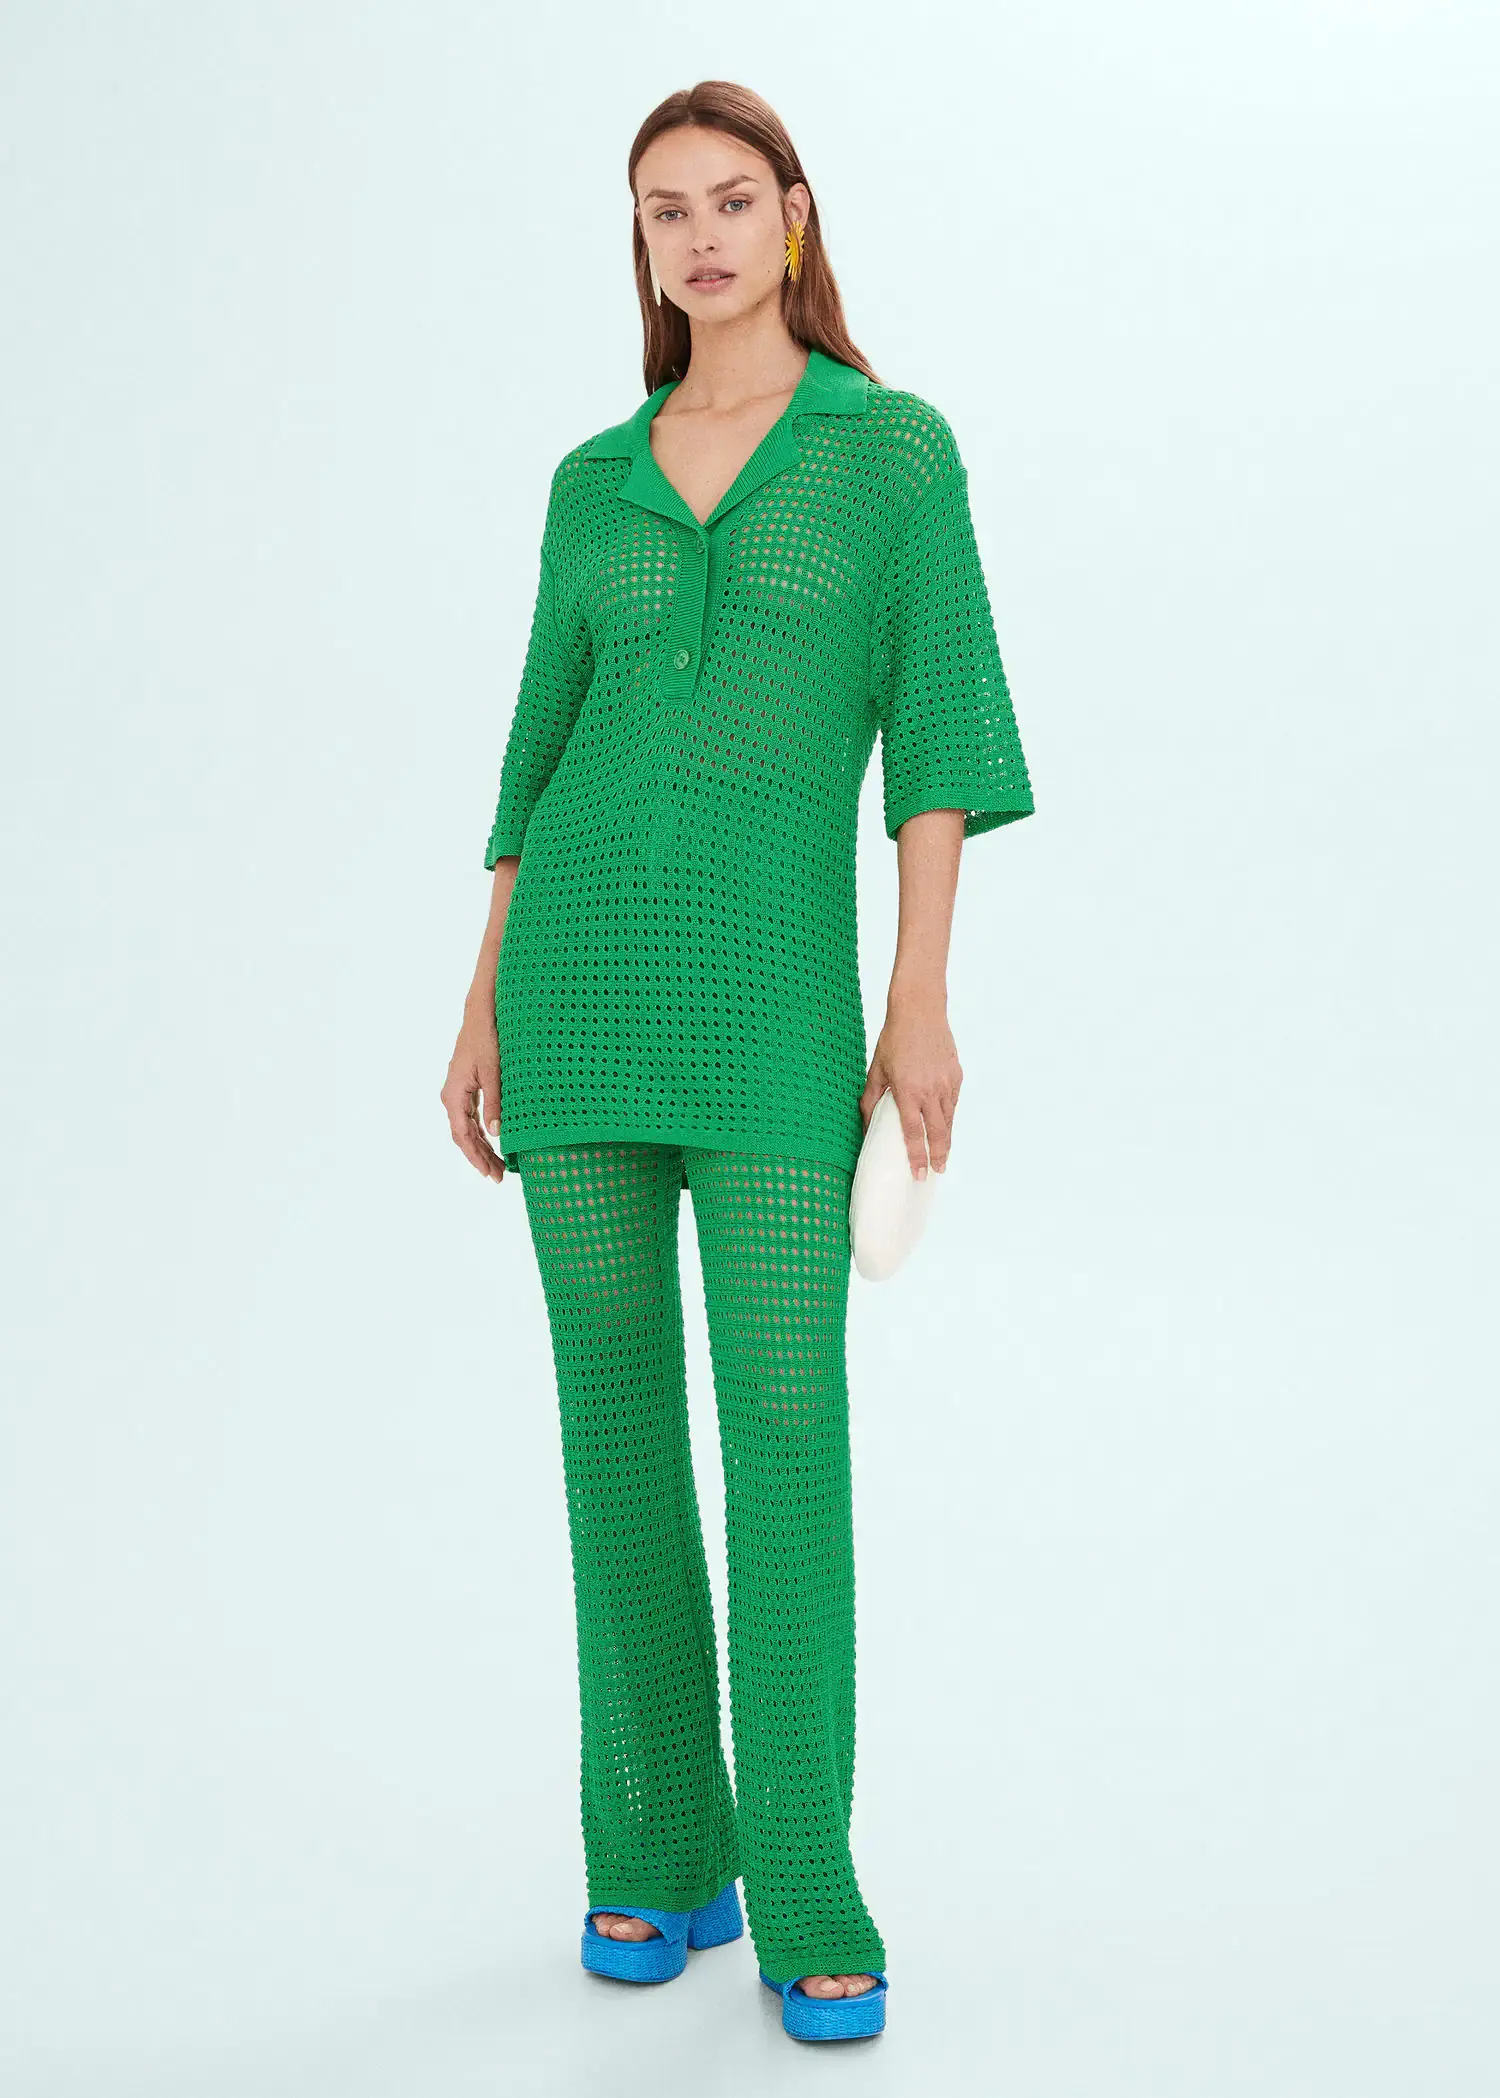 Mango Openwork knit pants. a woman in a green outfit standing in front of a white wall. 